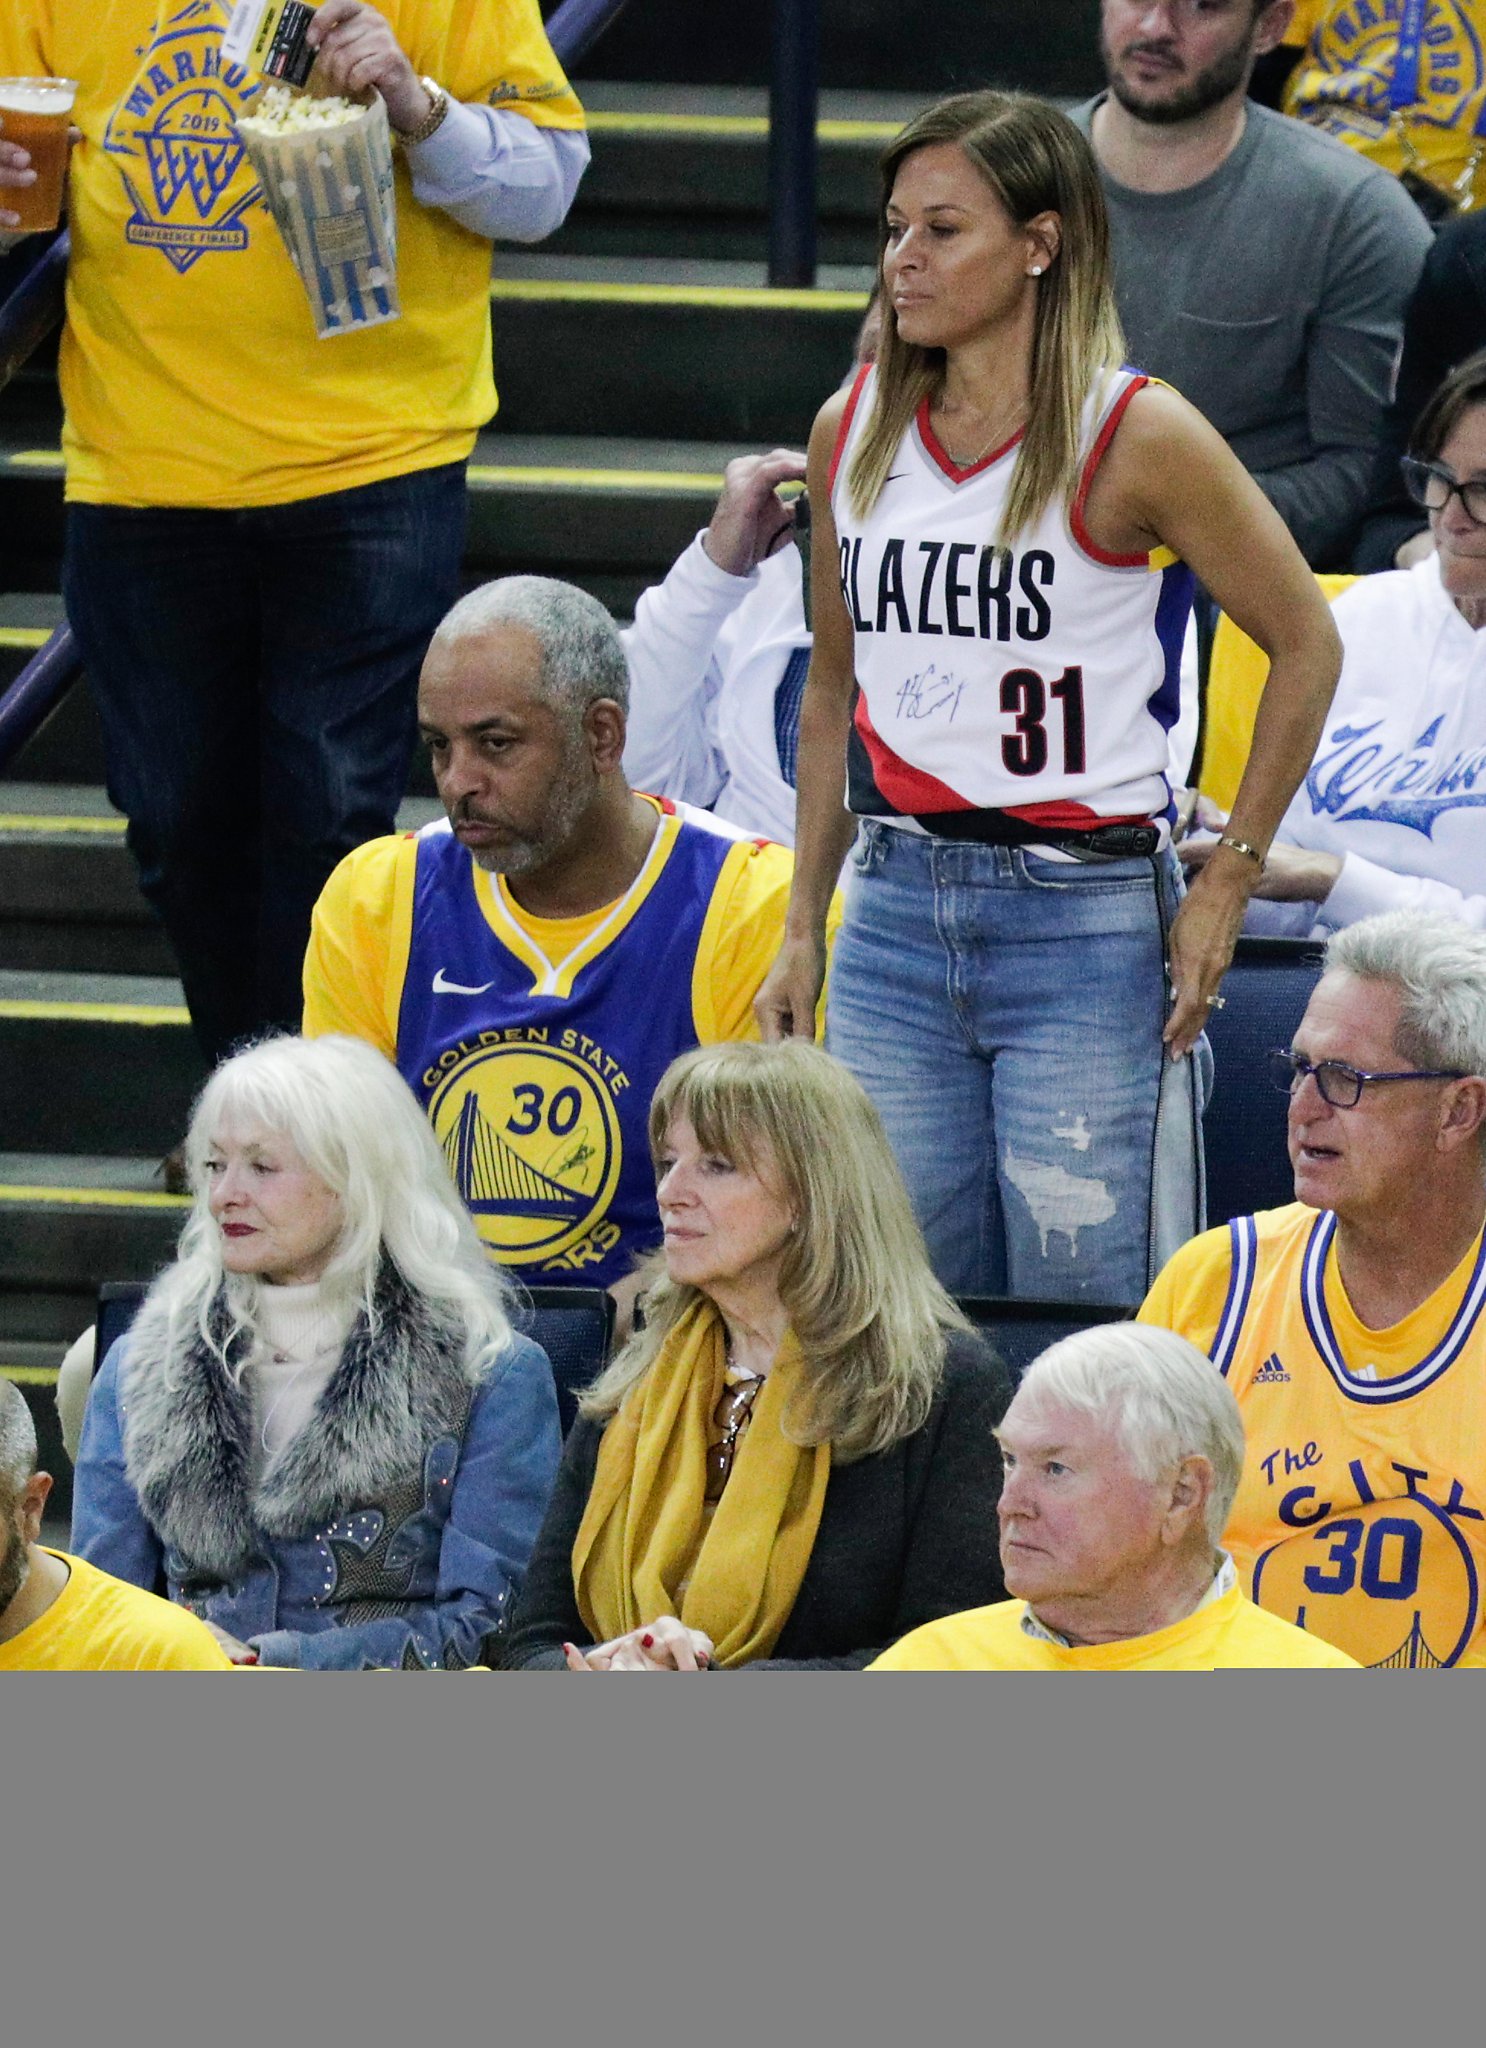 Dell And Sonya Curry Switch Split Jerseys After Steph Asks, 'Who You With?'